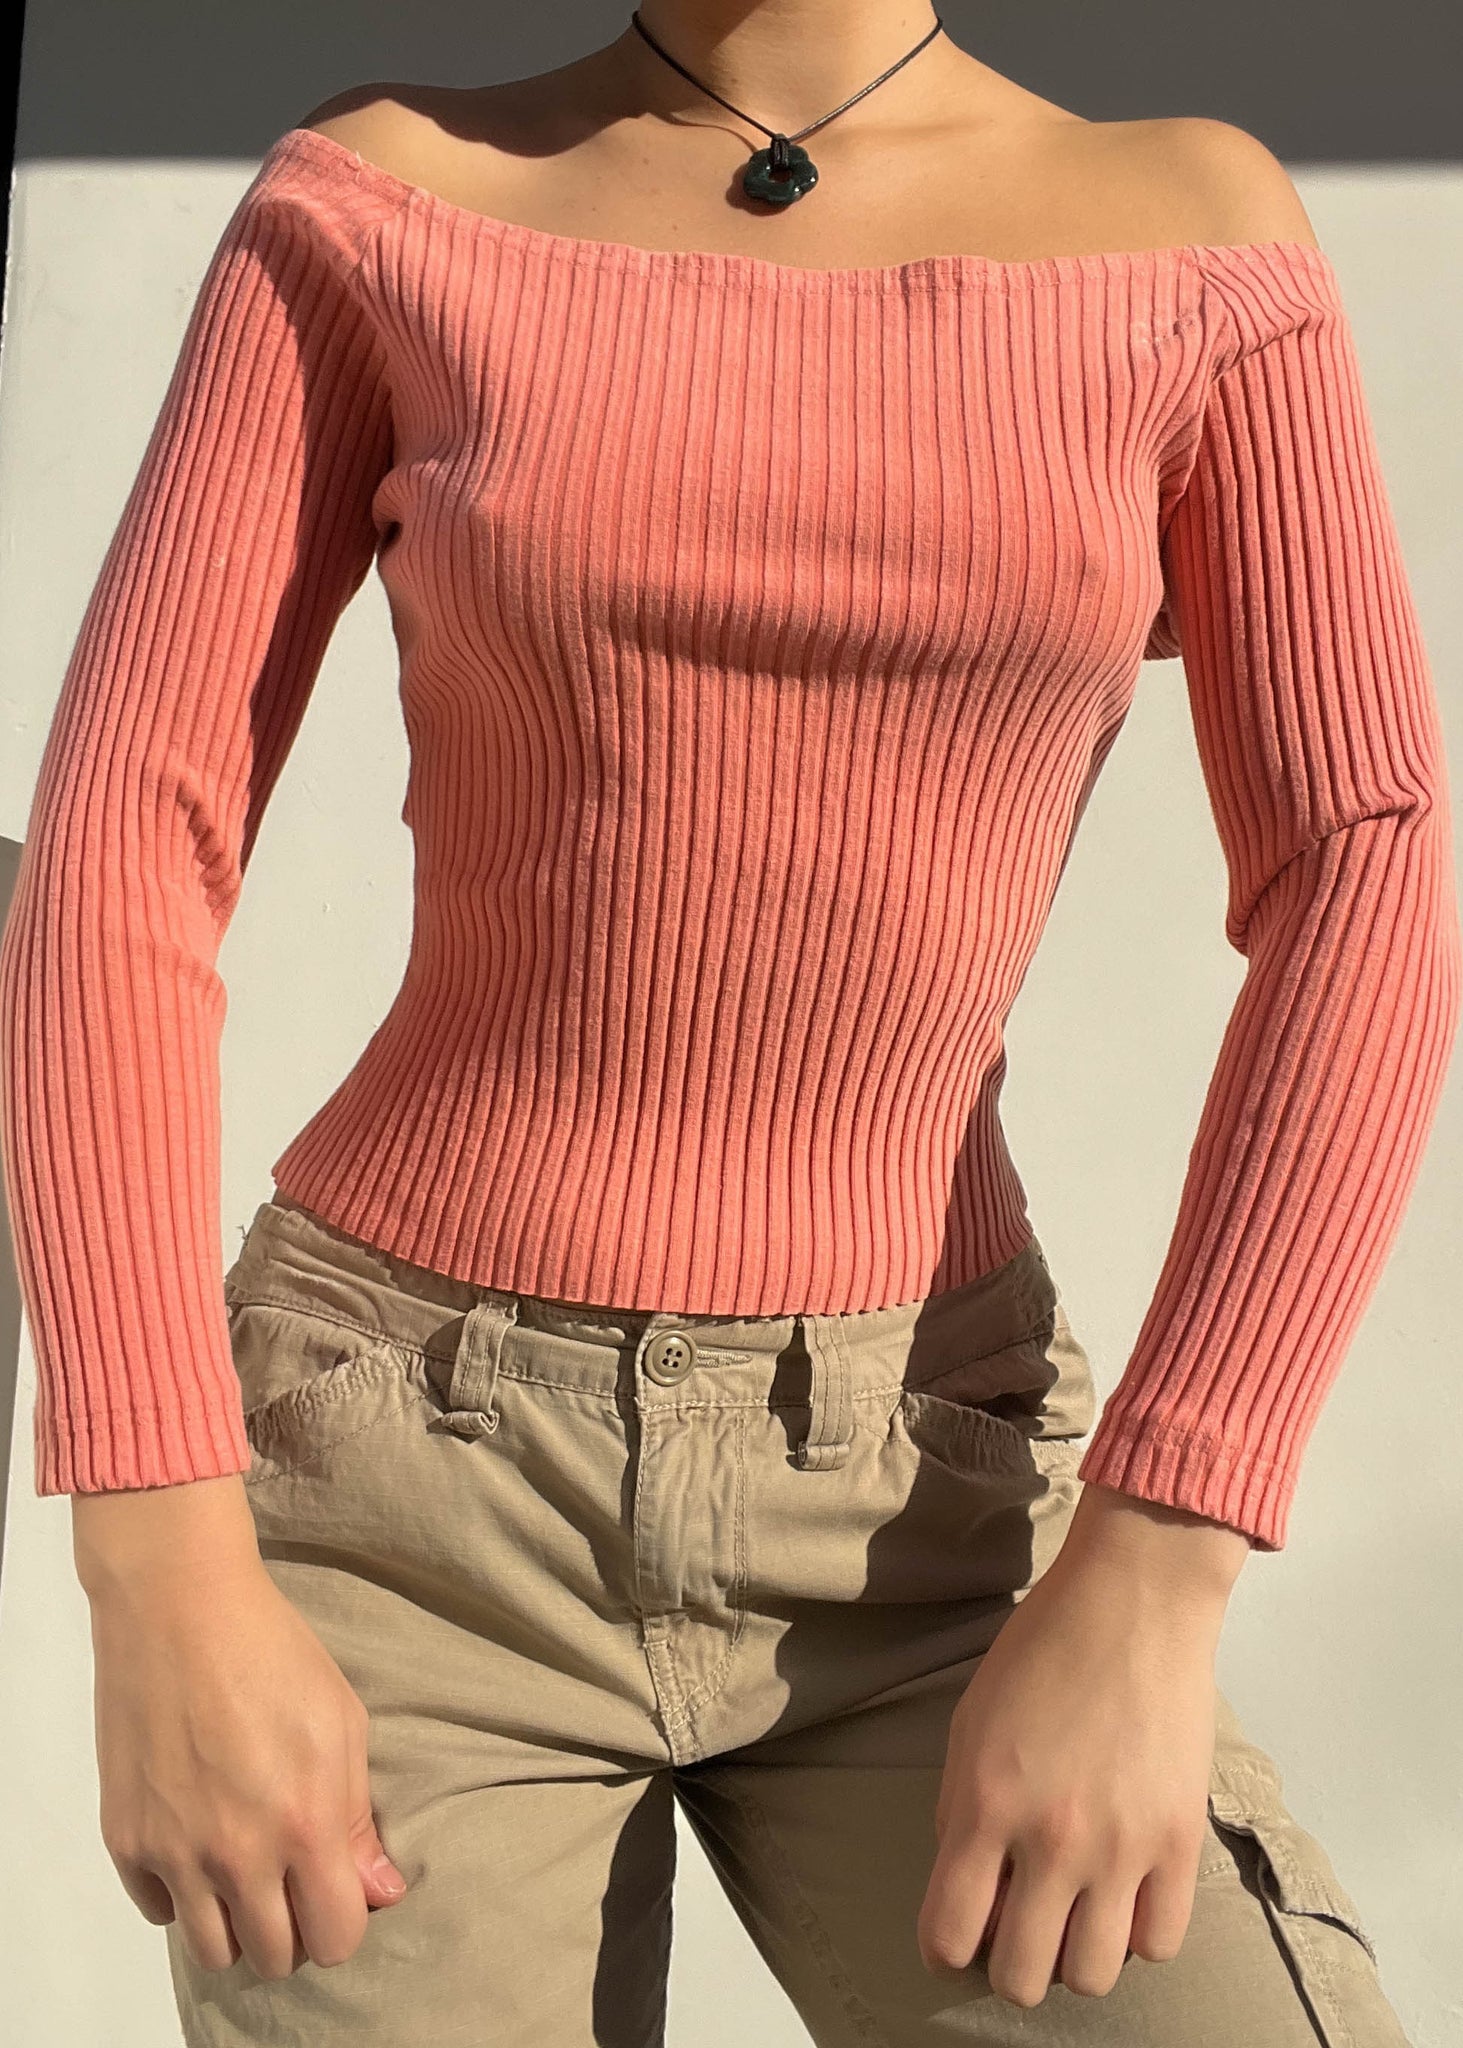 Ribbed Peach Off-the-Shoulder Top (M)